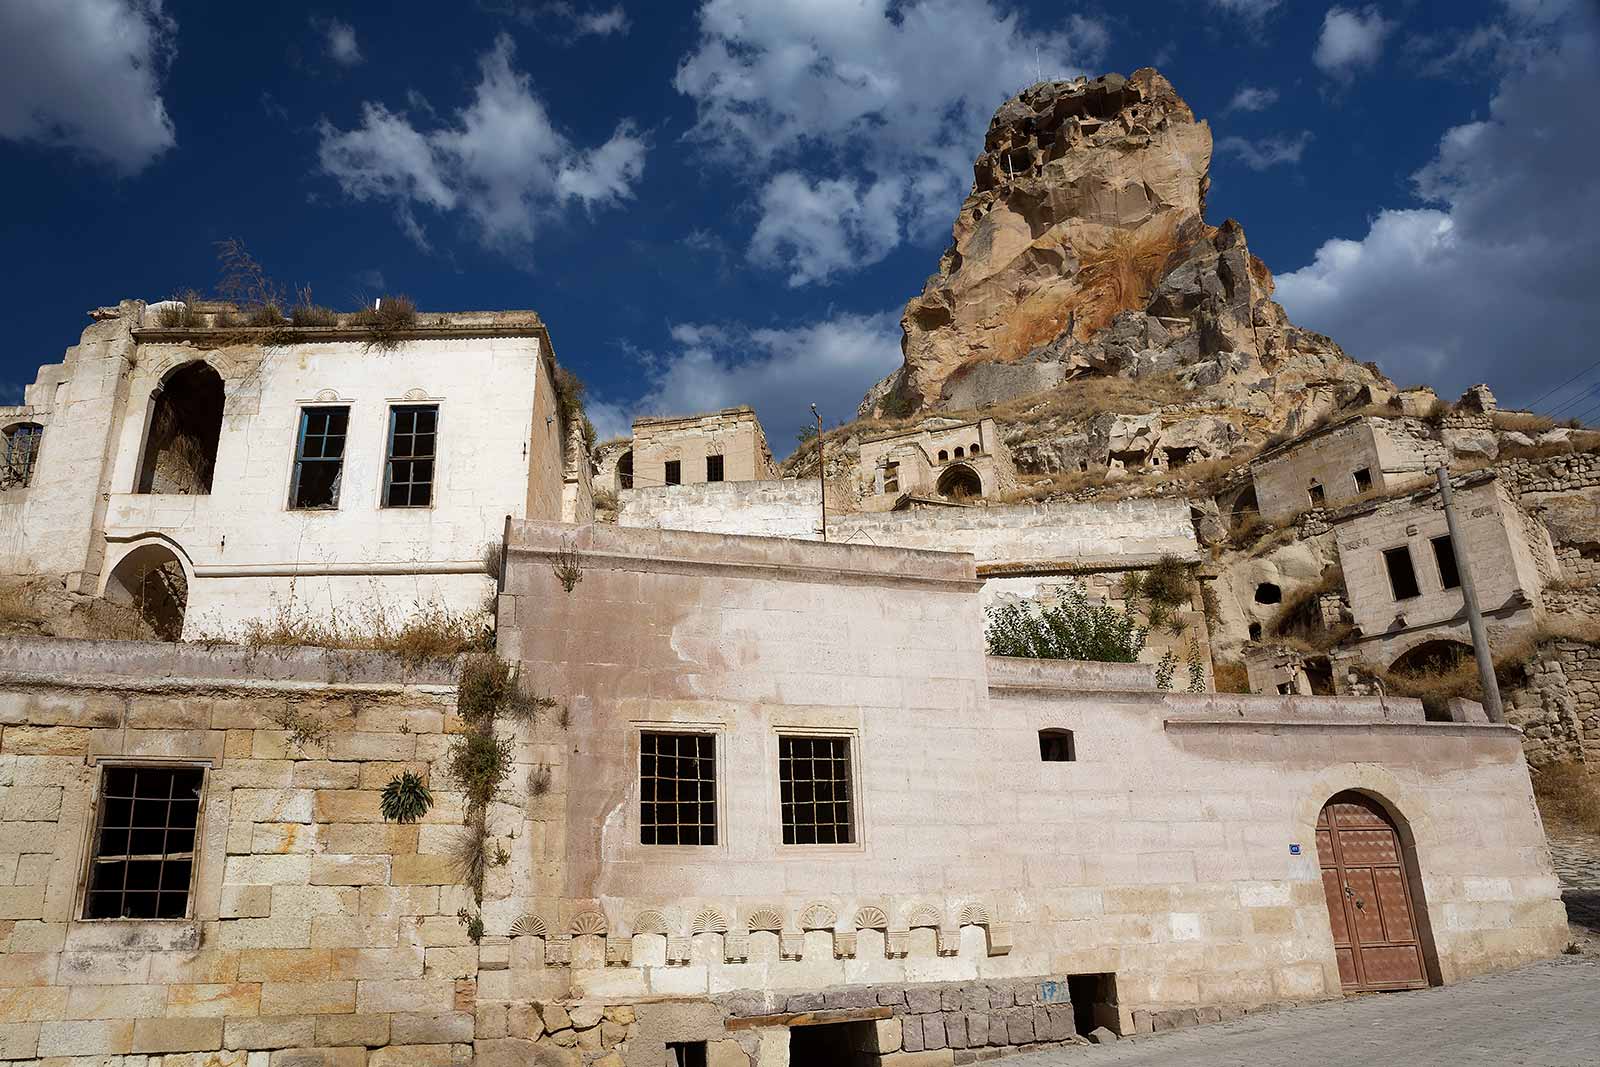 Wander downwards from the main square Ortahisar and you'll discover cobbled streets framed by stone-house ruins leading out to a gorge of pigeon house–speckled rock.